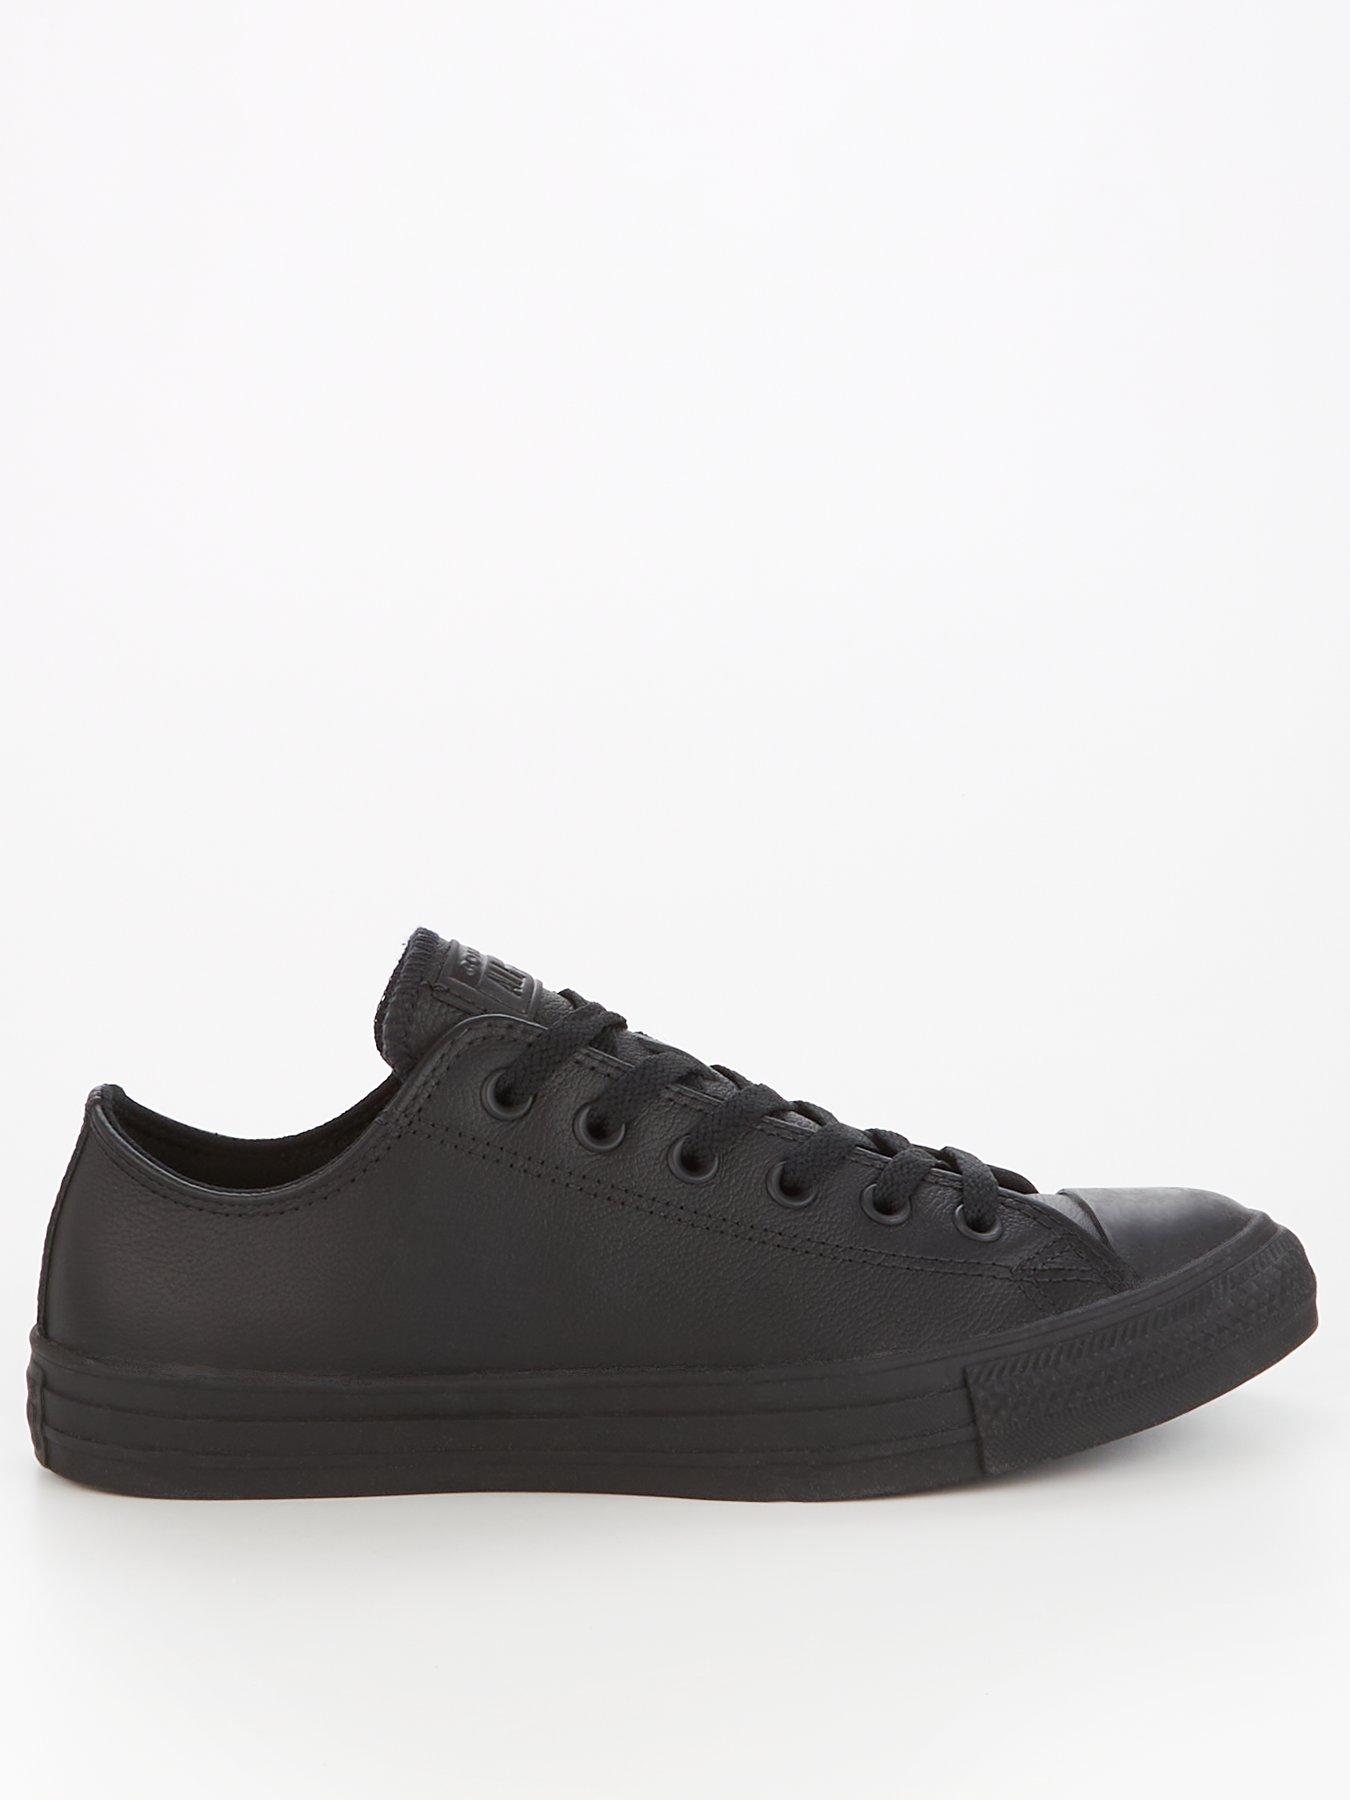 Converse Trainers | Mens Converse Shoes 